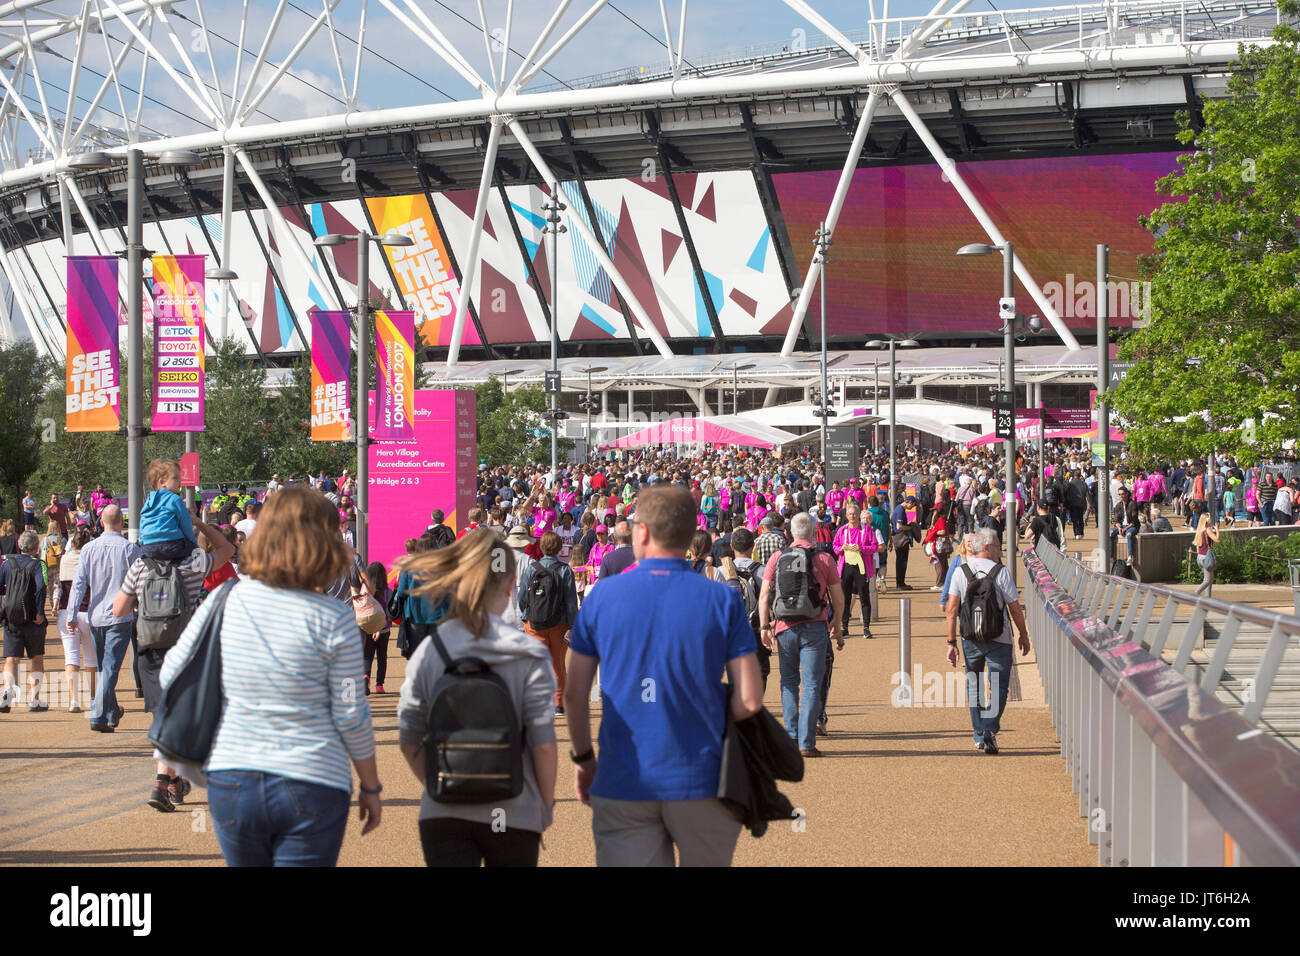 SPORTS FANS ARRIVING AT THE LONDON STADIUM FOR THE IAAF World Athletics  Championships AND BEING HELPED BY VOLUNTEERS Stock Photo - Alamy